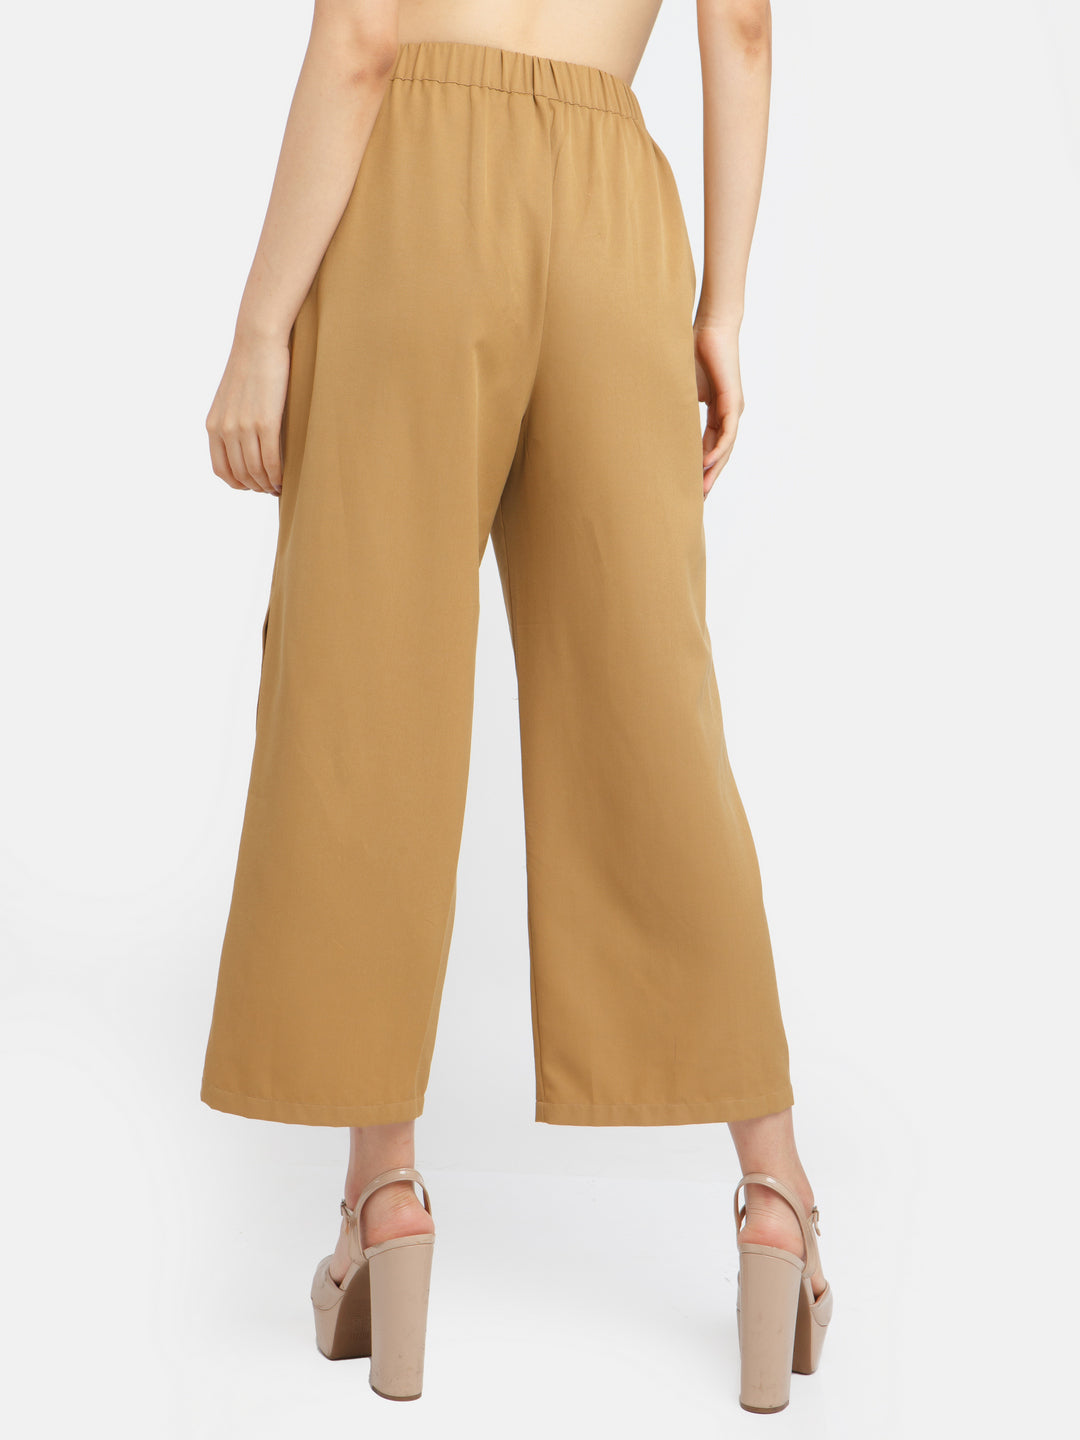 Brown Solid Straight Trouser For Women